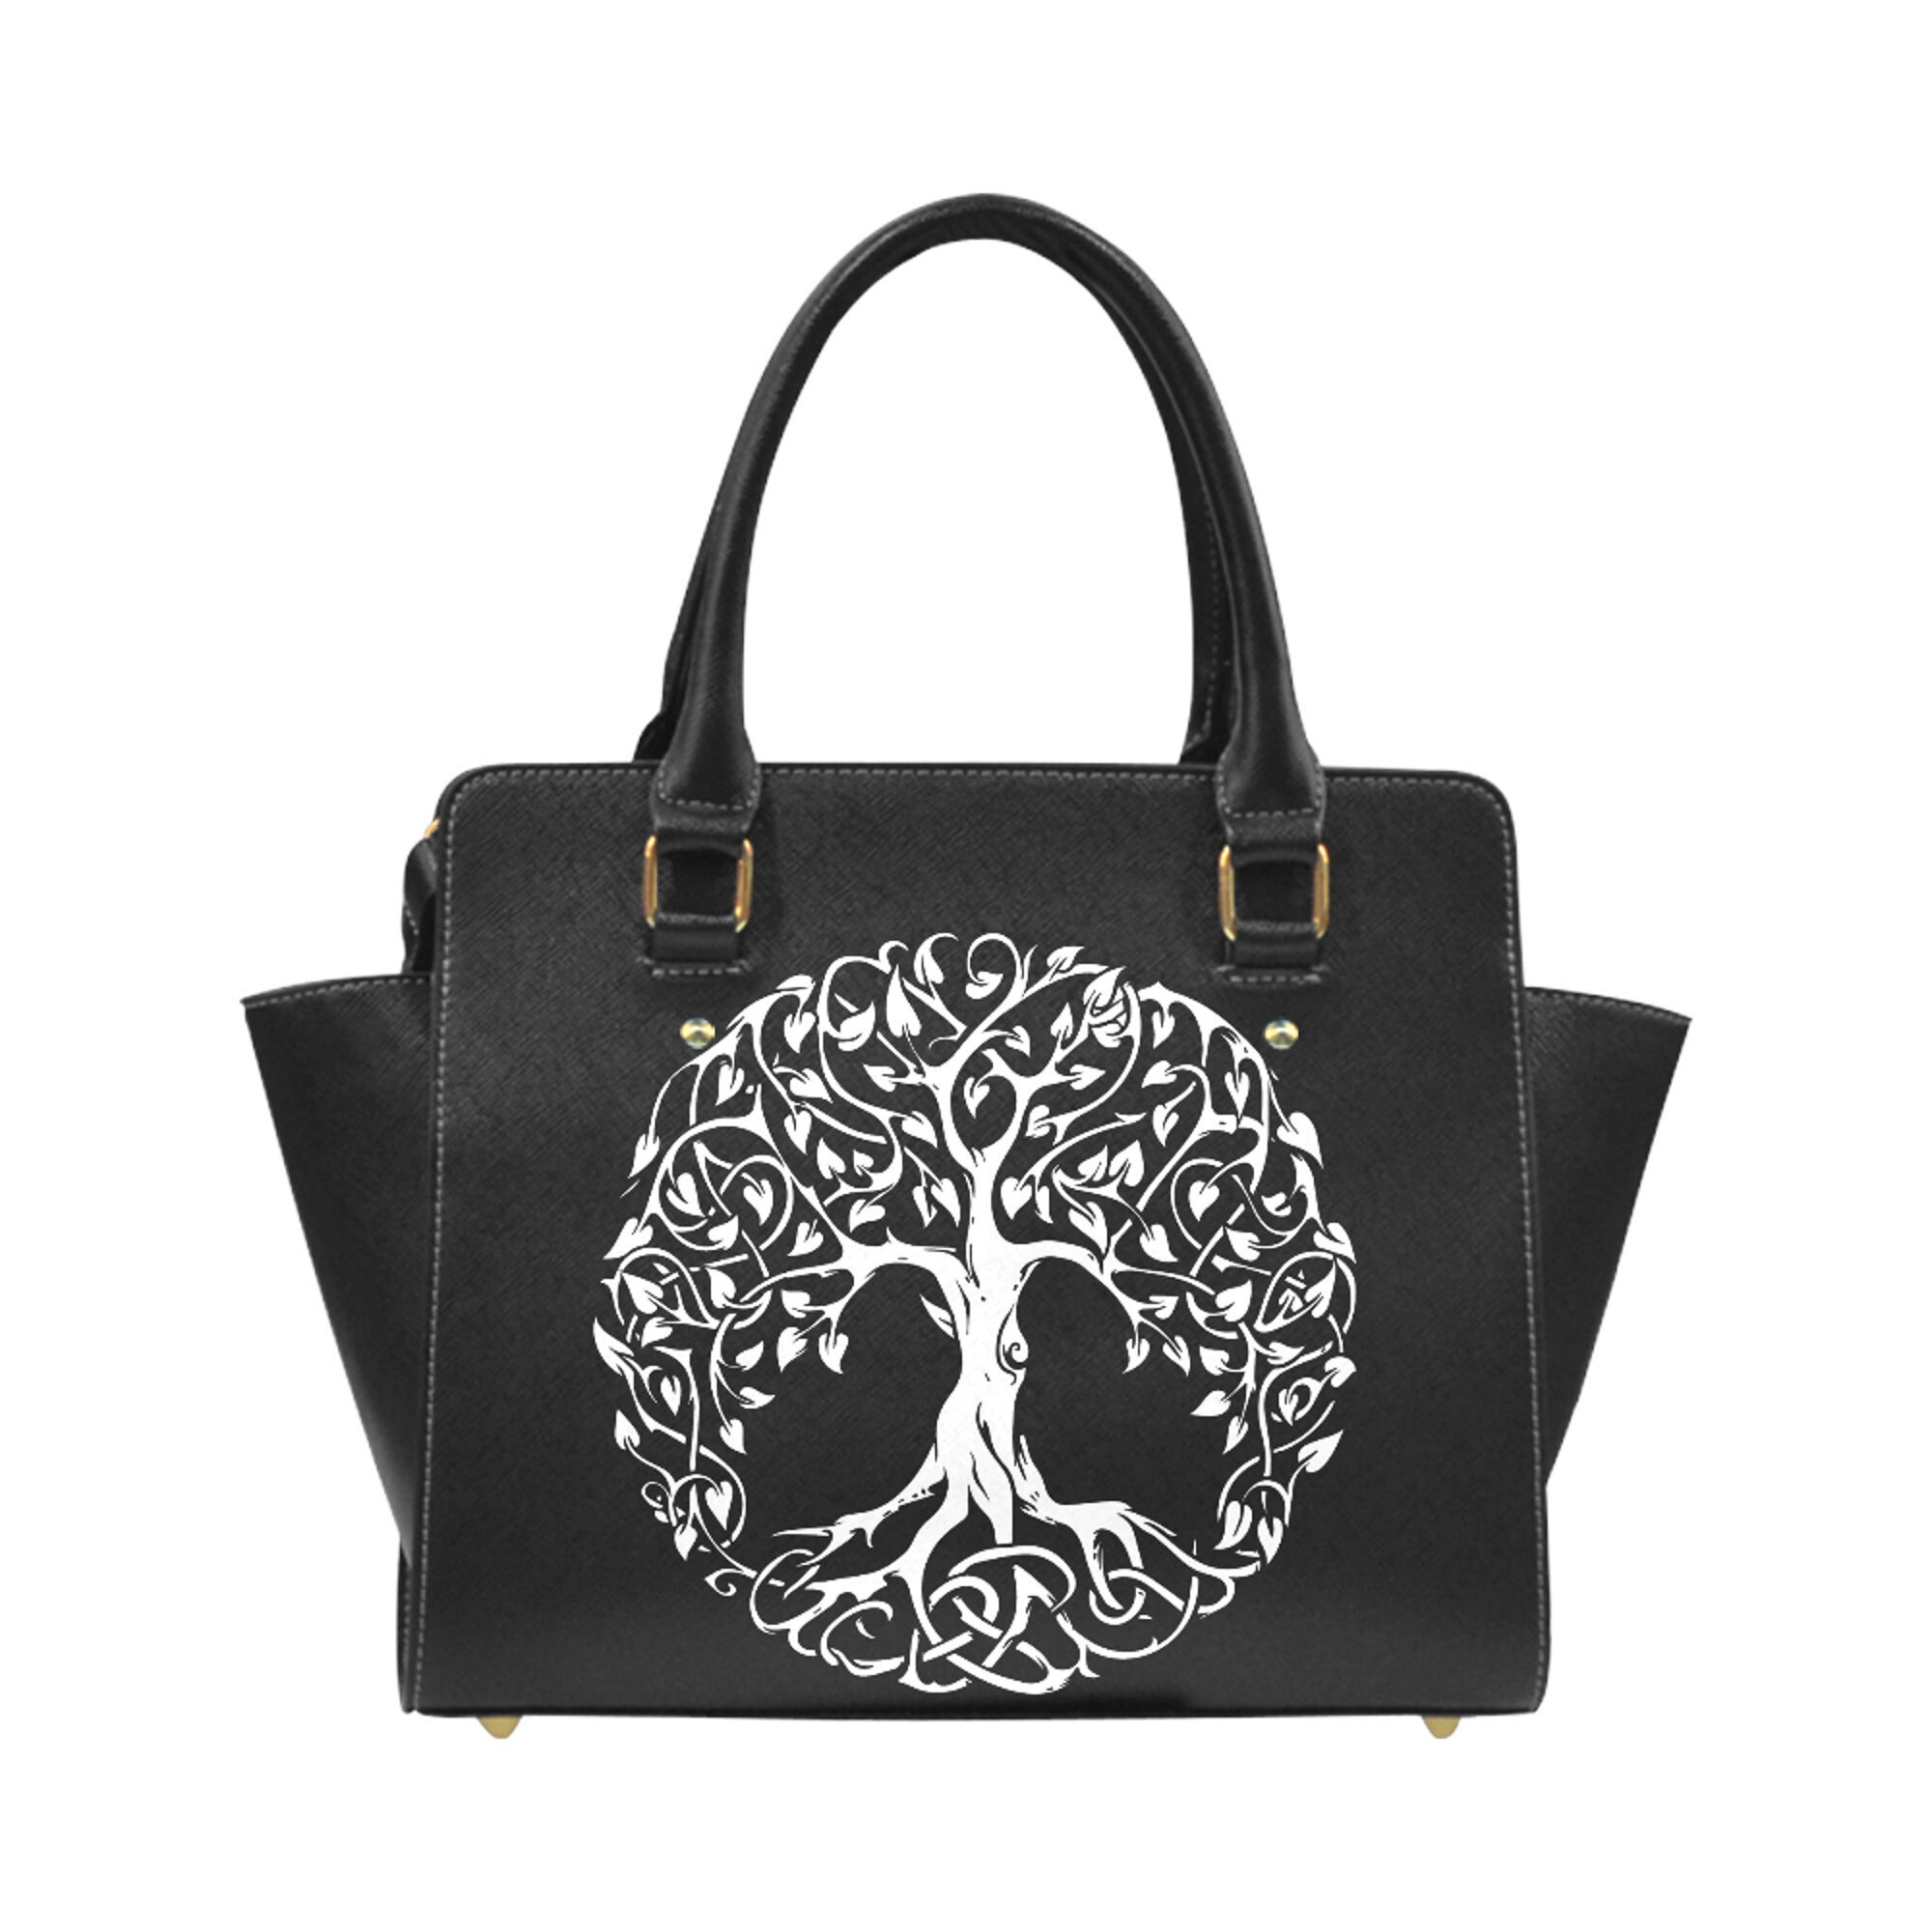 Tree of life Yggdrasil Witchcraft Witch bag Norse | Etsy